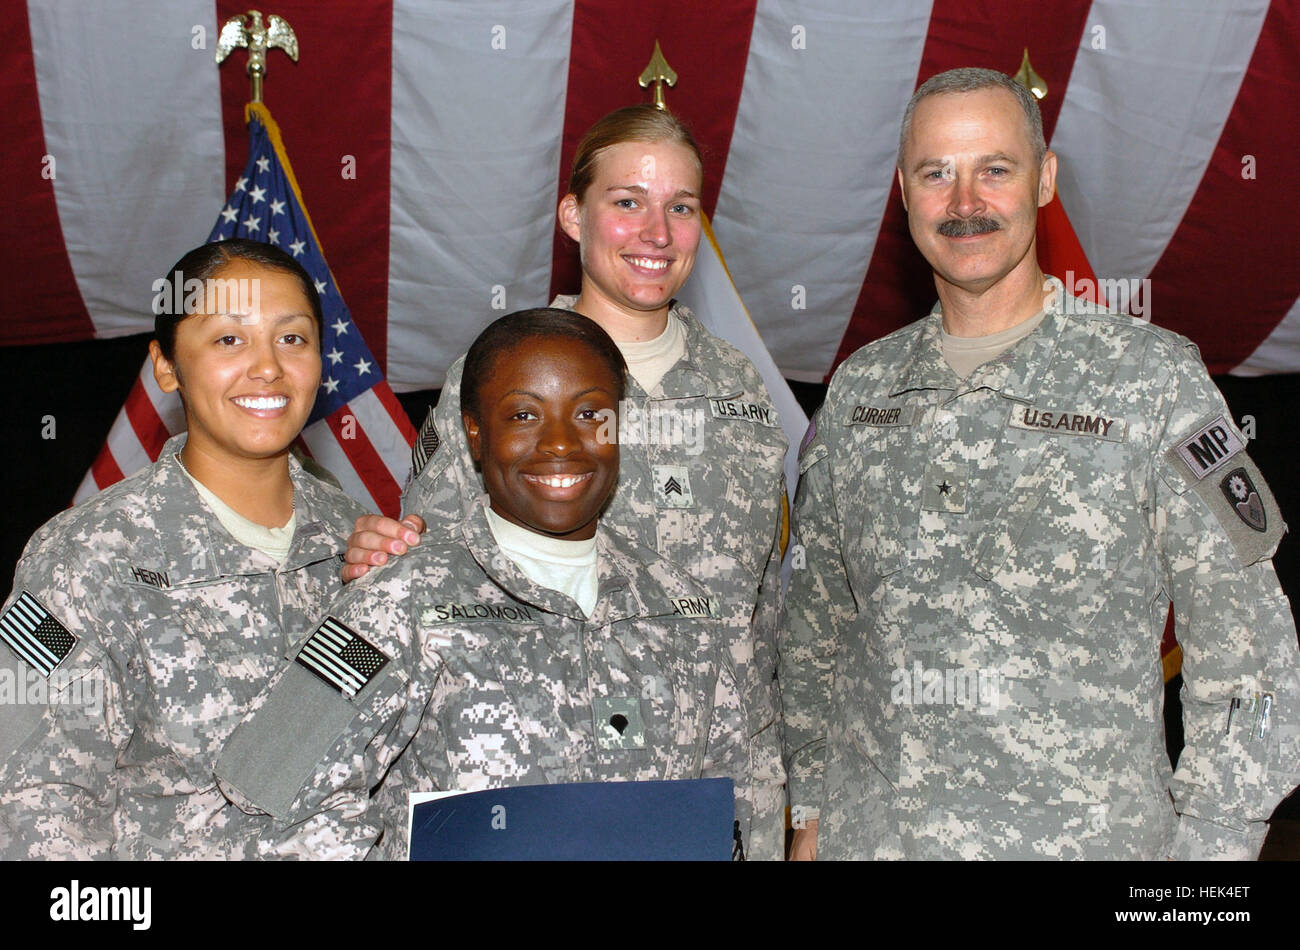 Spc. Glory-Dana Salomon, front, formerly of Haiti, attained her American  citizenship July 4 during a Naturalization Ceremony at Al Faw Palace, Camp  Victory, Iraq. She is flanked by Spc. Veronica Hernandez (left)